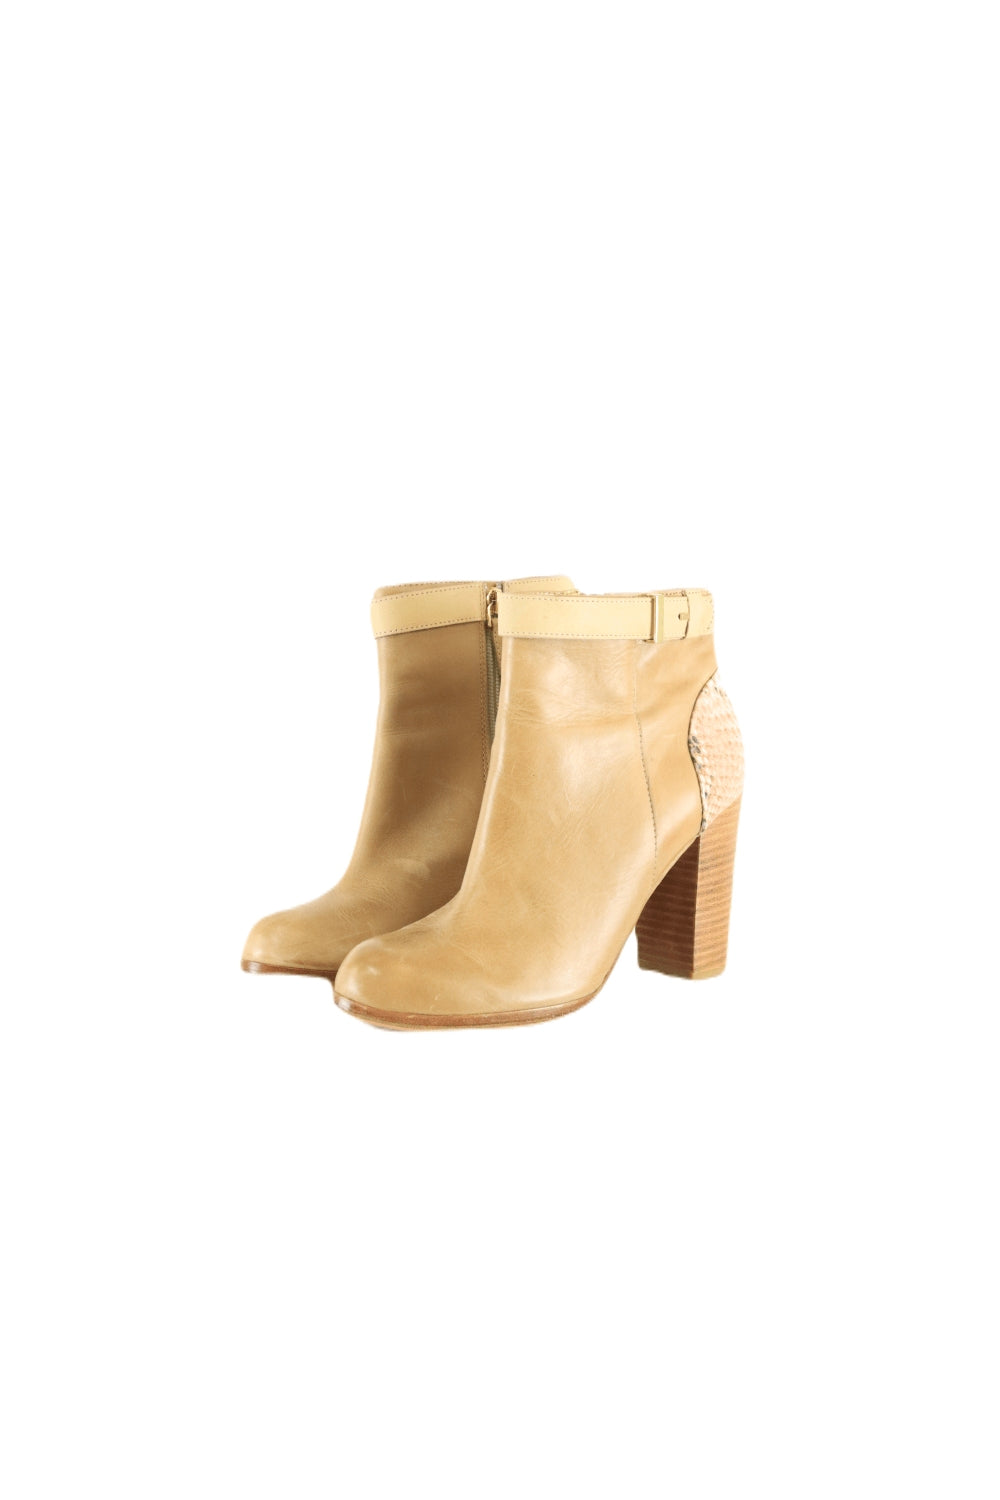 Mimco Tan Leather Ankle Boots 38